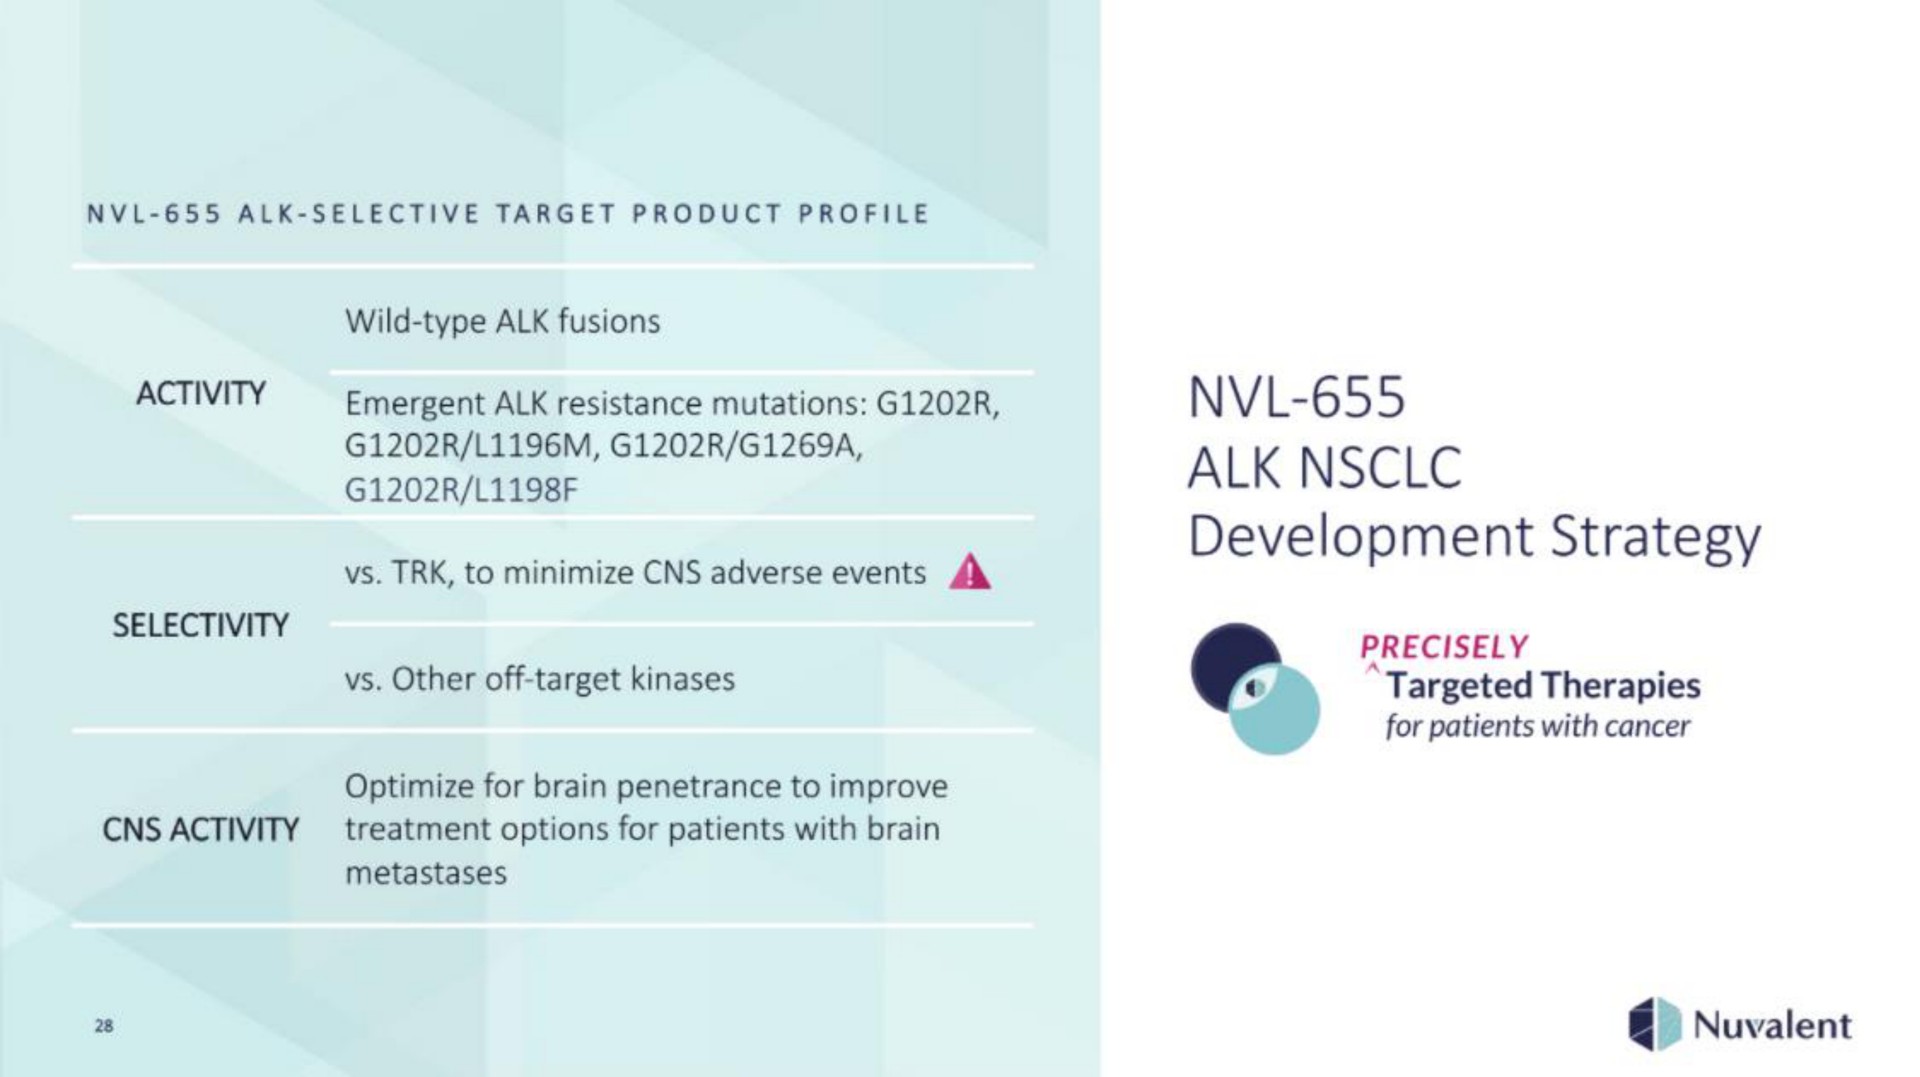 alk development strategy go targeted therapies | Nuvalent